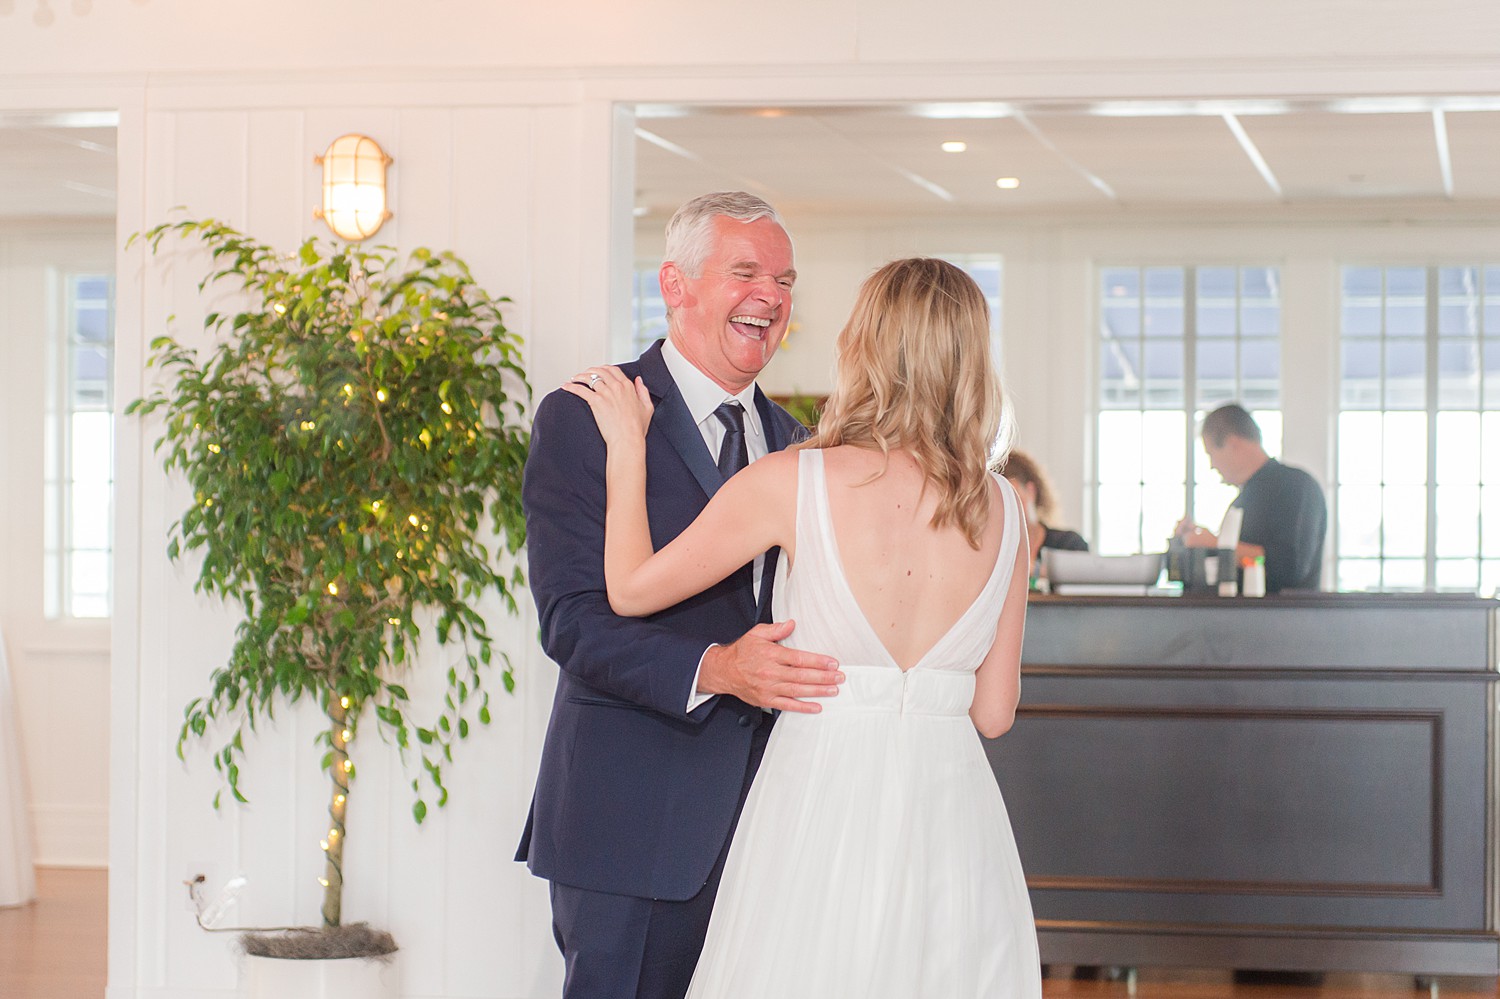 bride and father dance together at reception | Tips to include dad in wedding day!